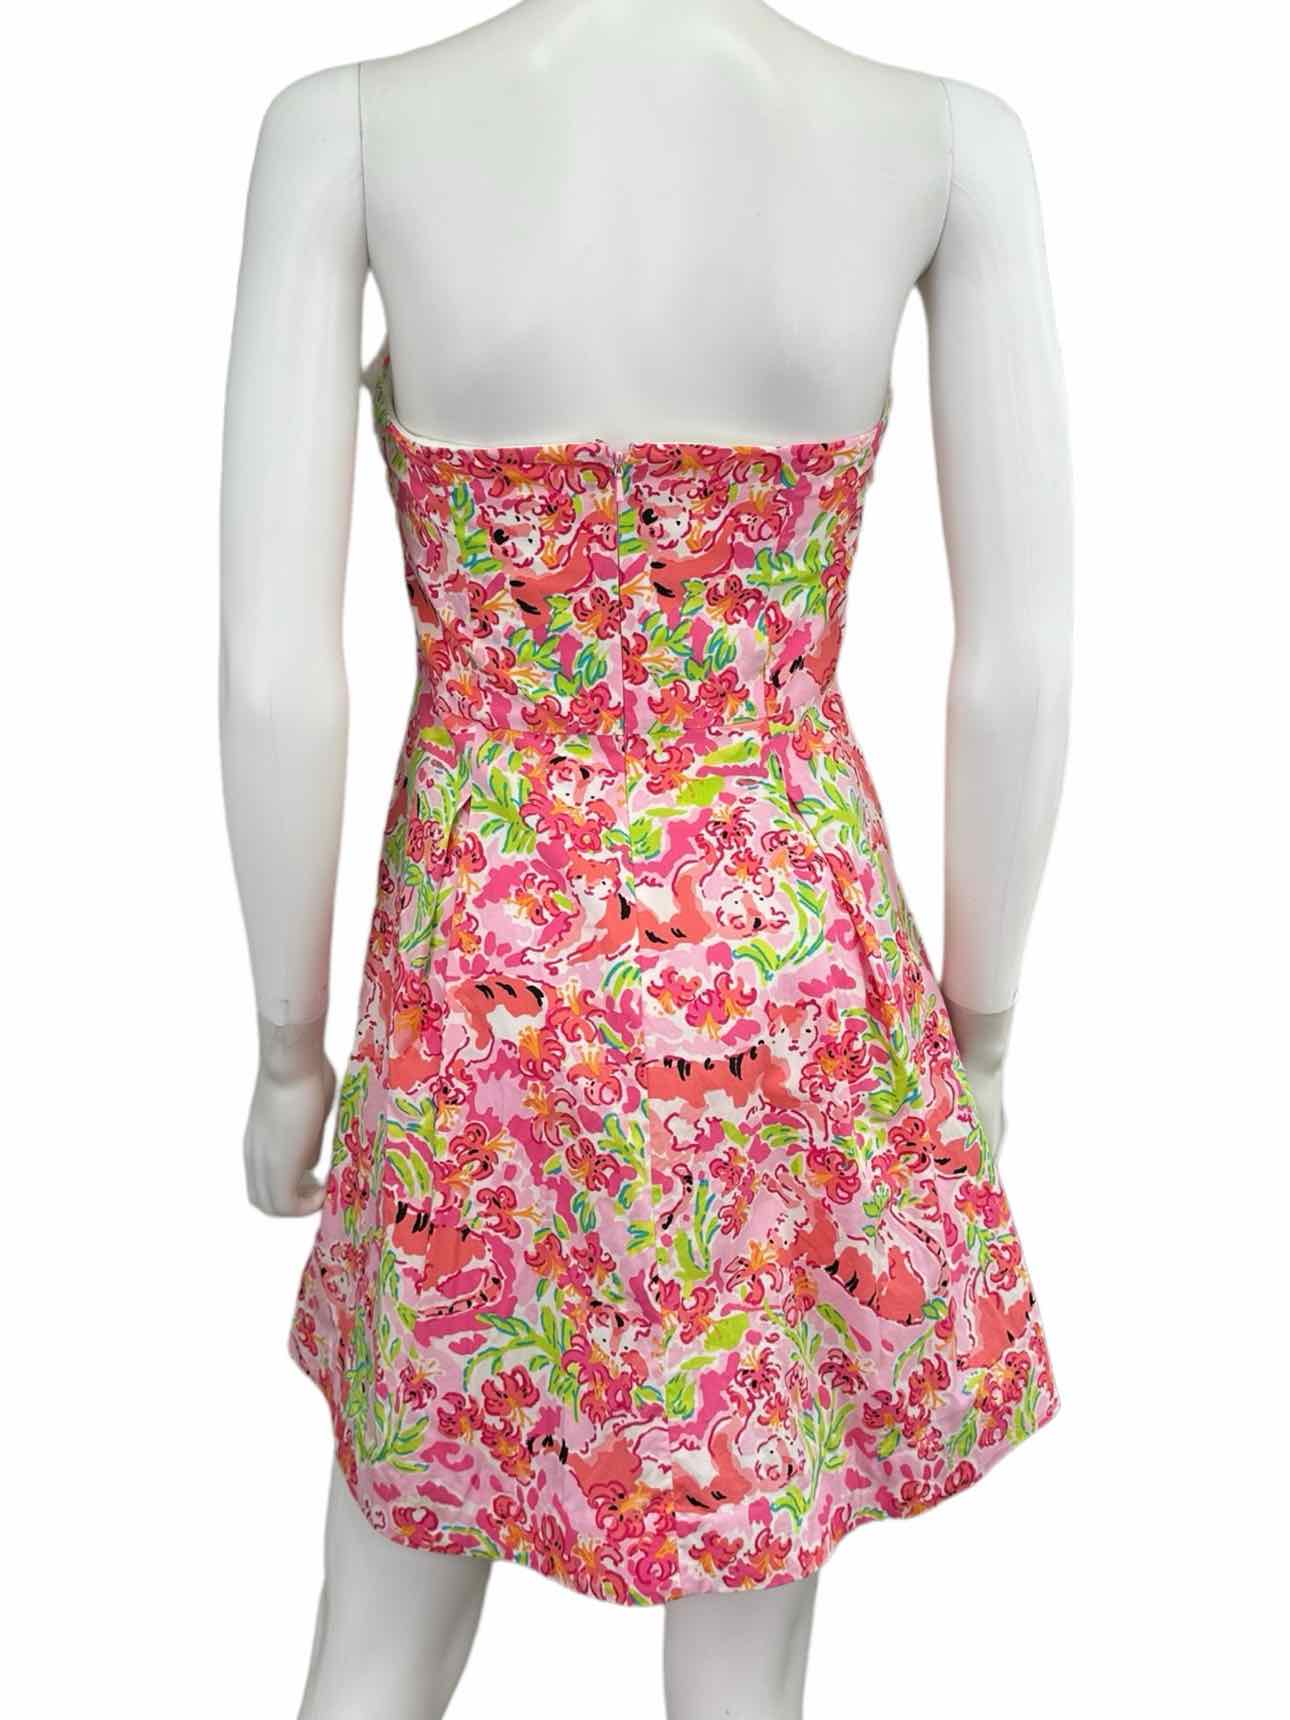 Lilly Pulitzer Pink Floral Print Strapless Dress Size 2